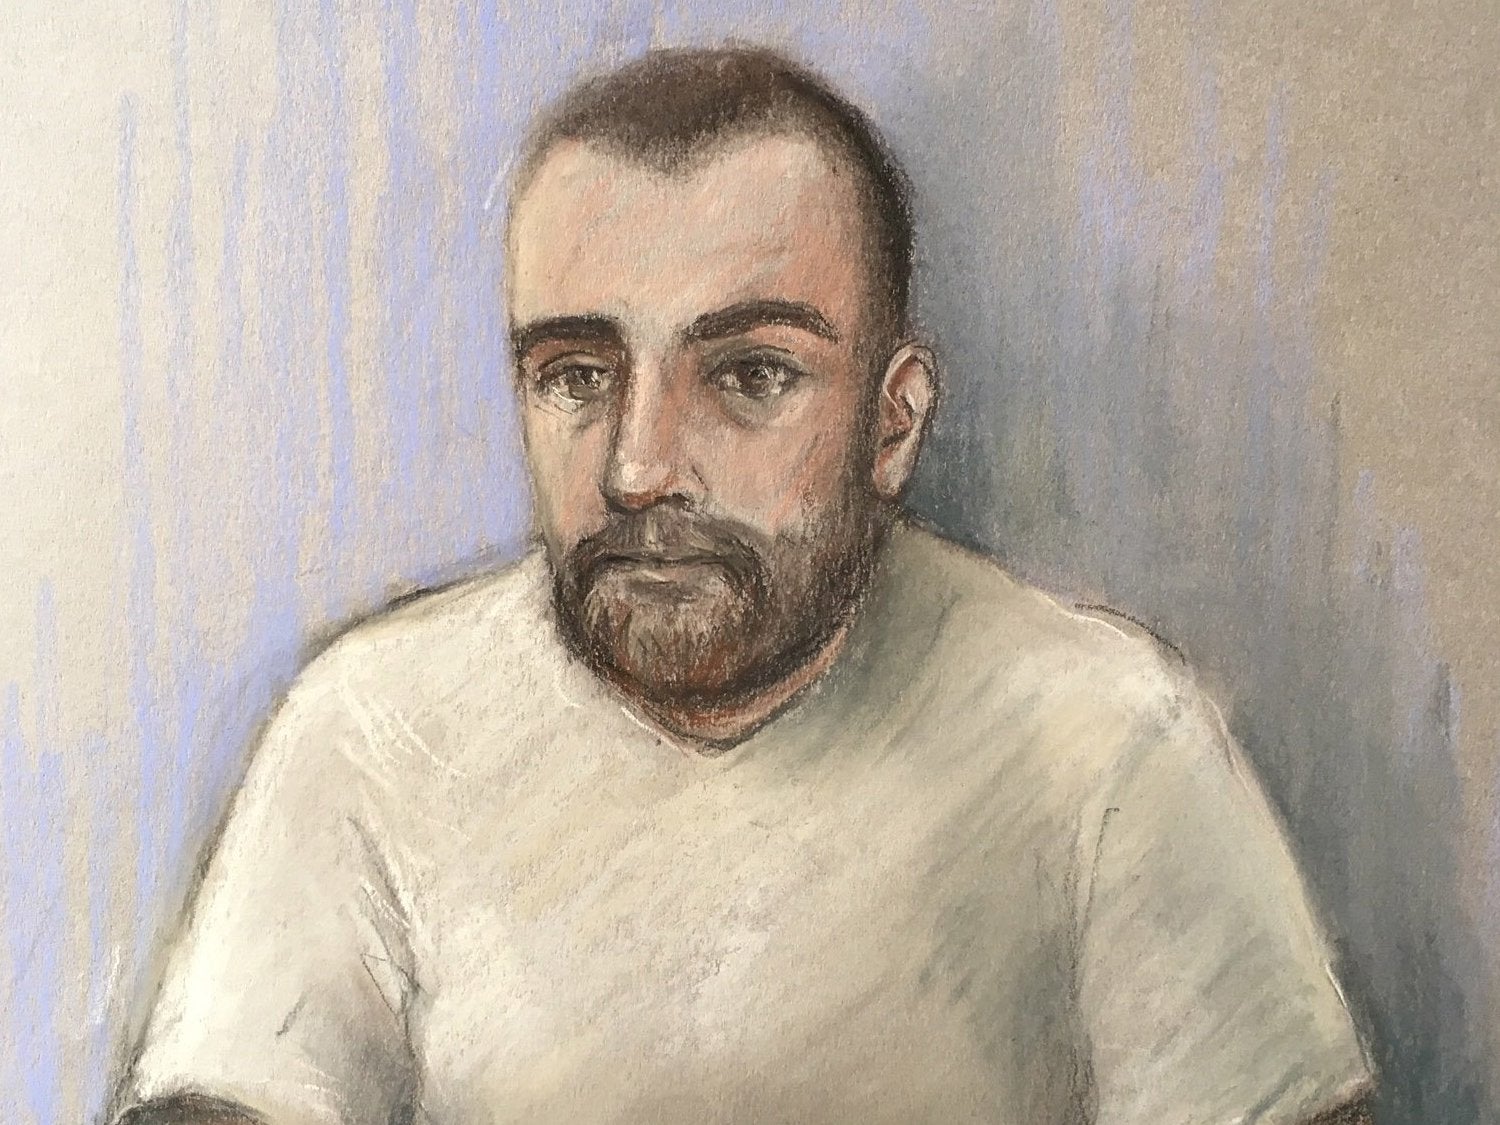 Court artist sketch by Elizabeth Cook of Jack Shepherd as he appears before Plymouth Magistrates' Court via video link charged with assaulting a barman with a bottle, on 30 April